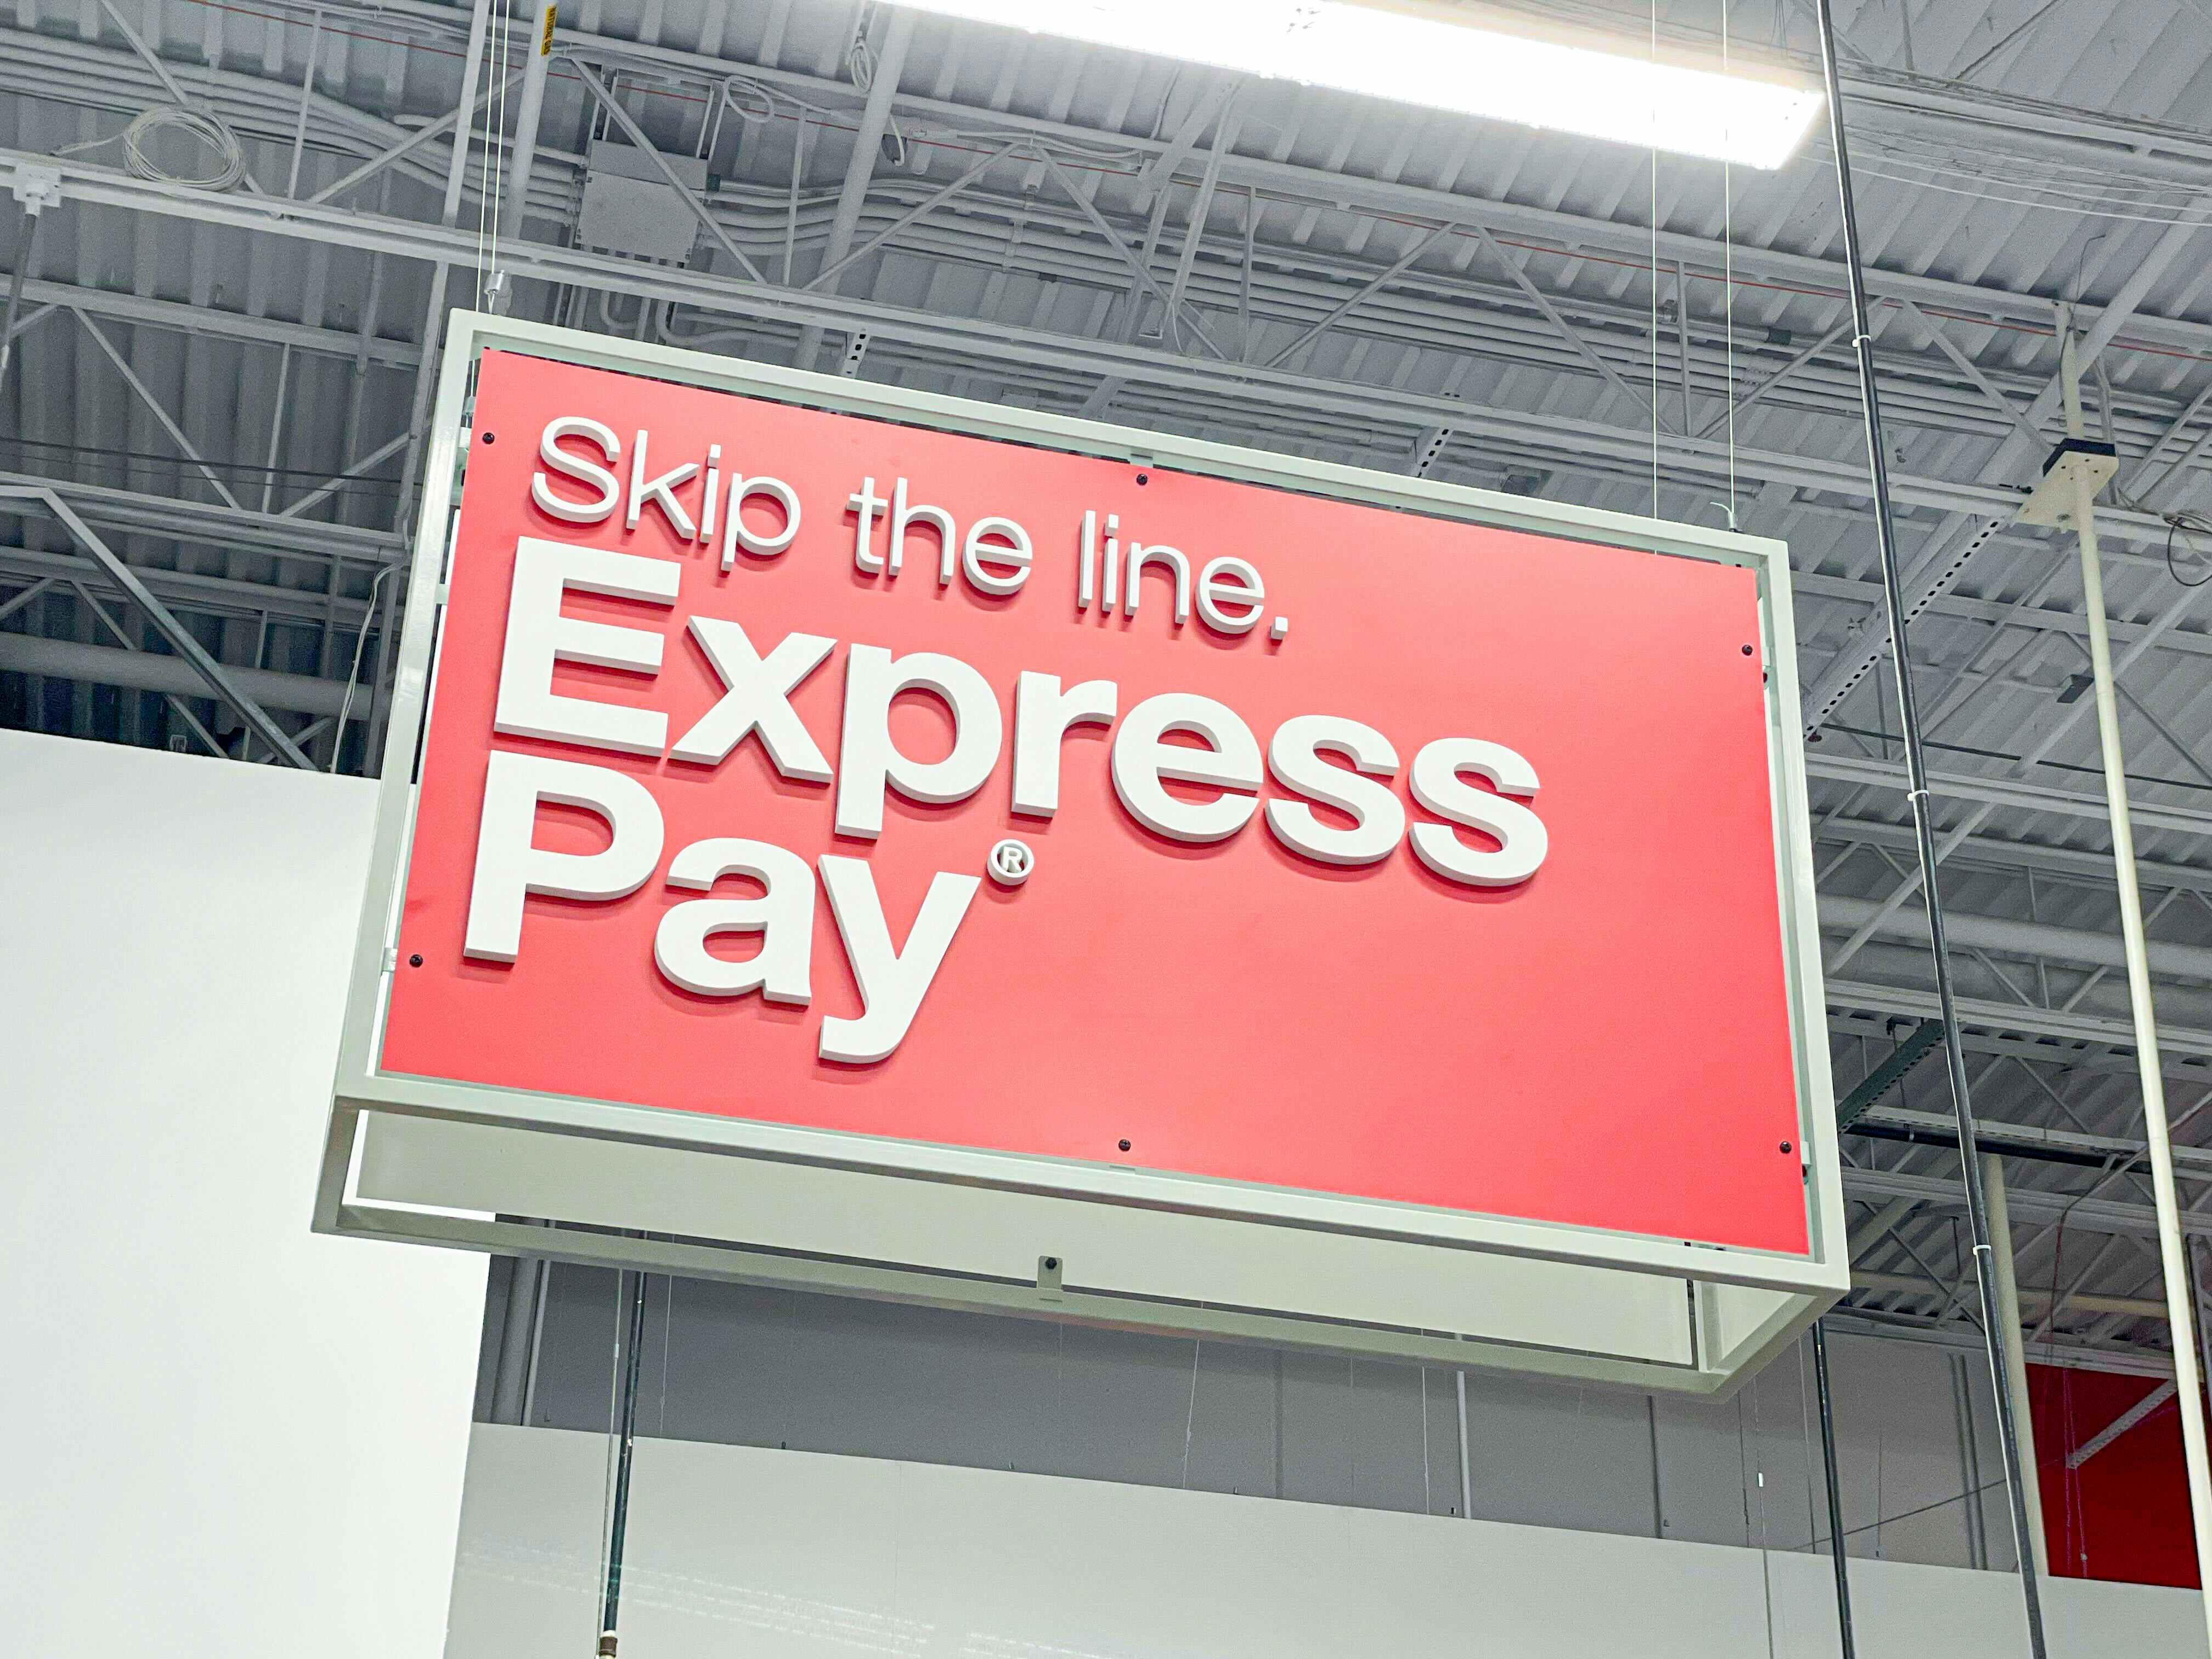 Express pay signage in red